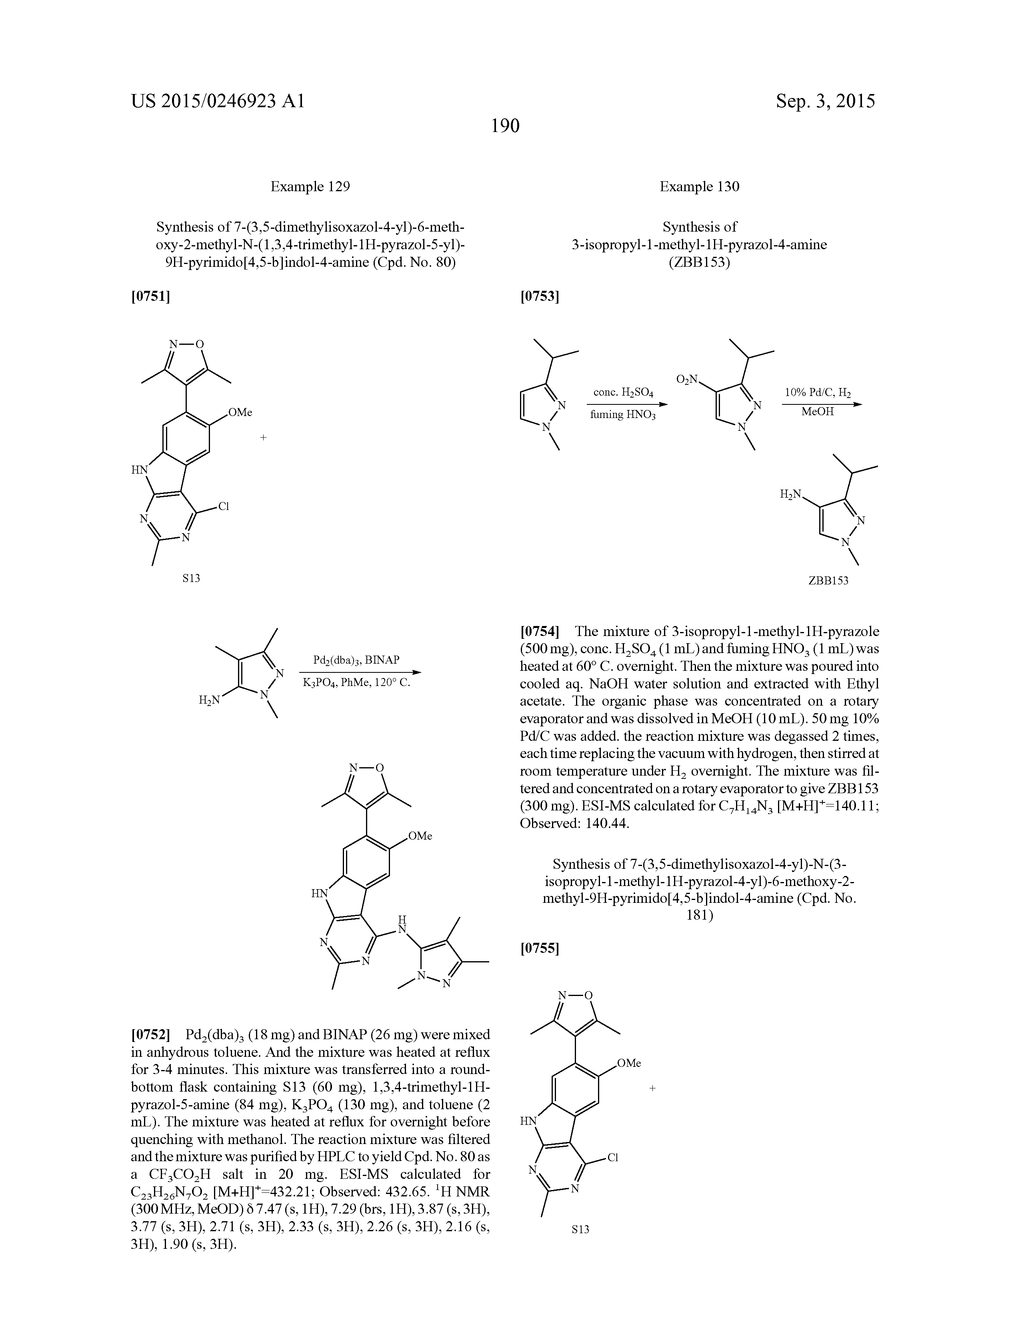 9H-PYRIMIDO[4,5-B]INDOLES AND RELATED ANALOGS AS BET BROMODOMAIN     INHIBITORS - diagram, schematic, and image 218